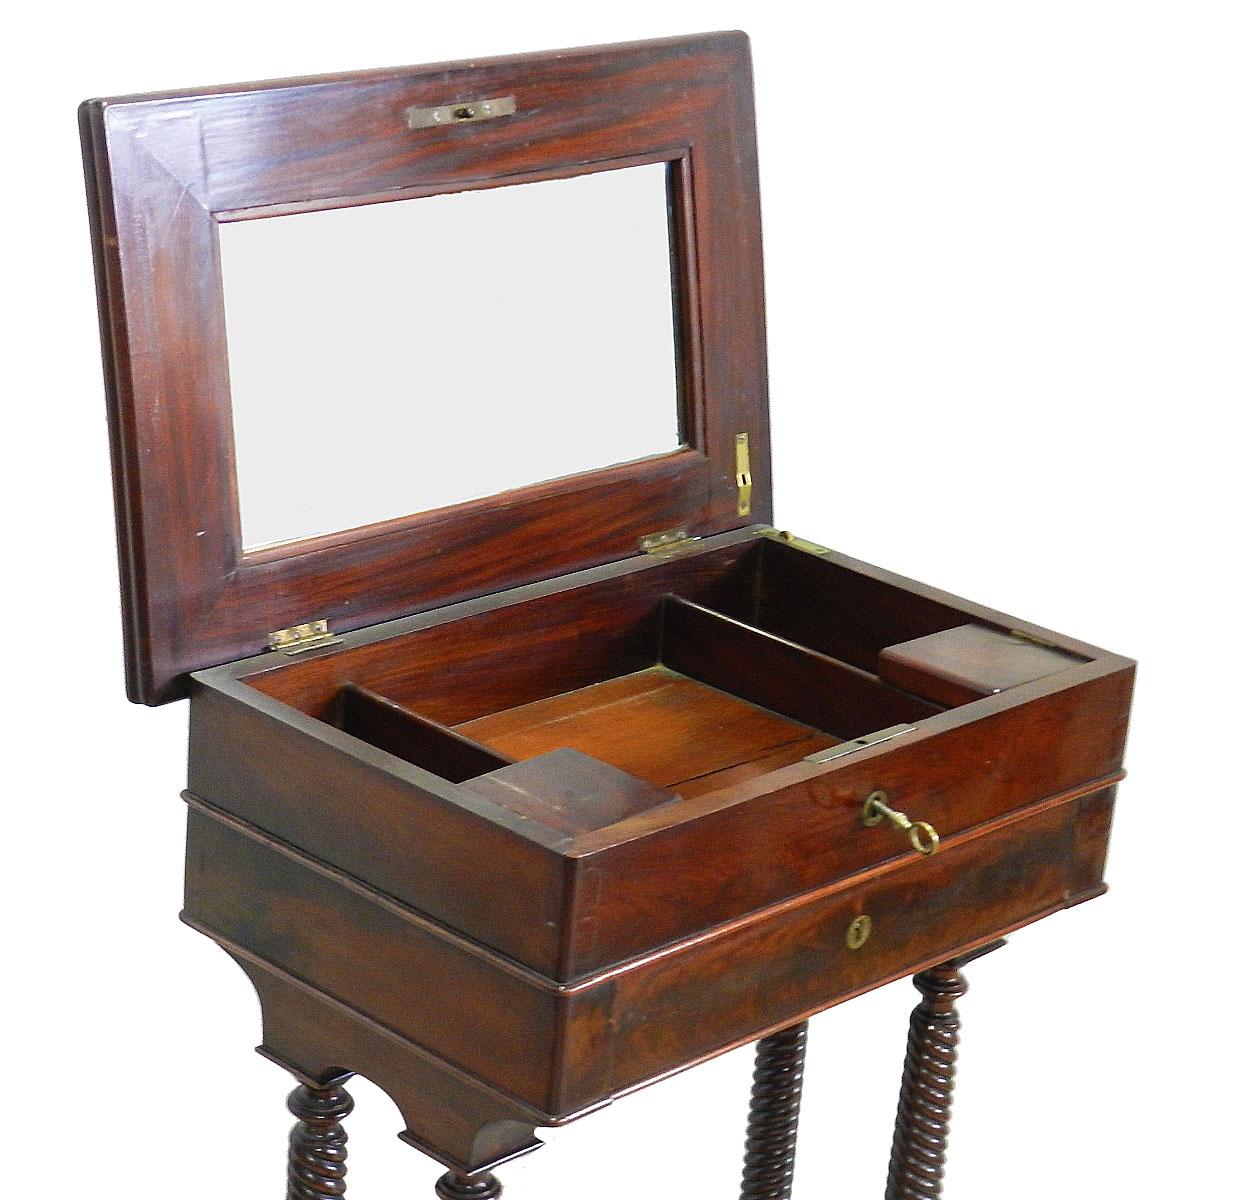 Antique Louis Philippe sewing table, circa 1850-1860
A good quality centre work and writing table
Exotic wood
The lift-up lid opens up to reveal a mirror and compartments.
Lower drawer pulls out with a cover to be a small writing desk
Good